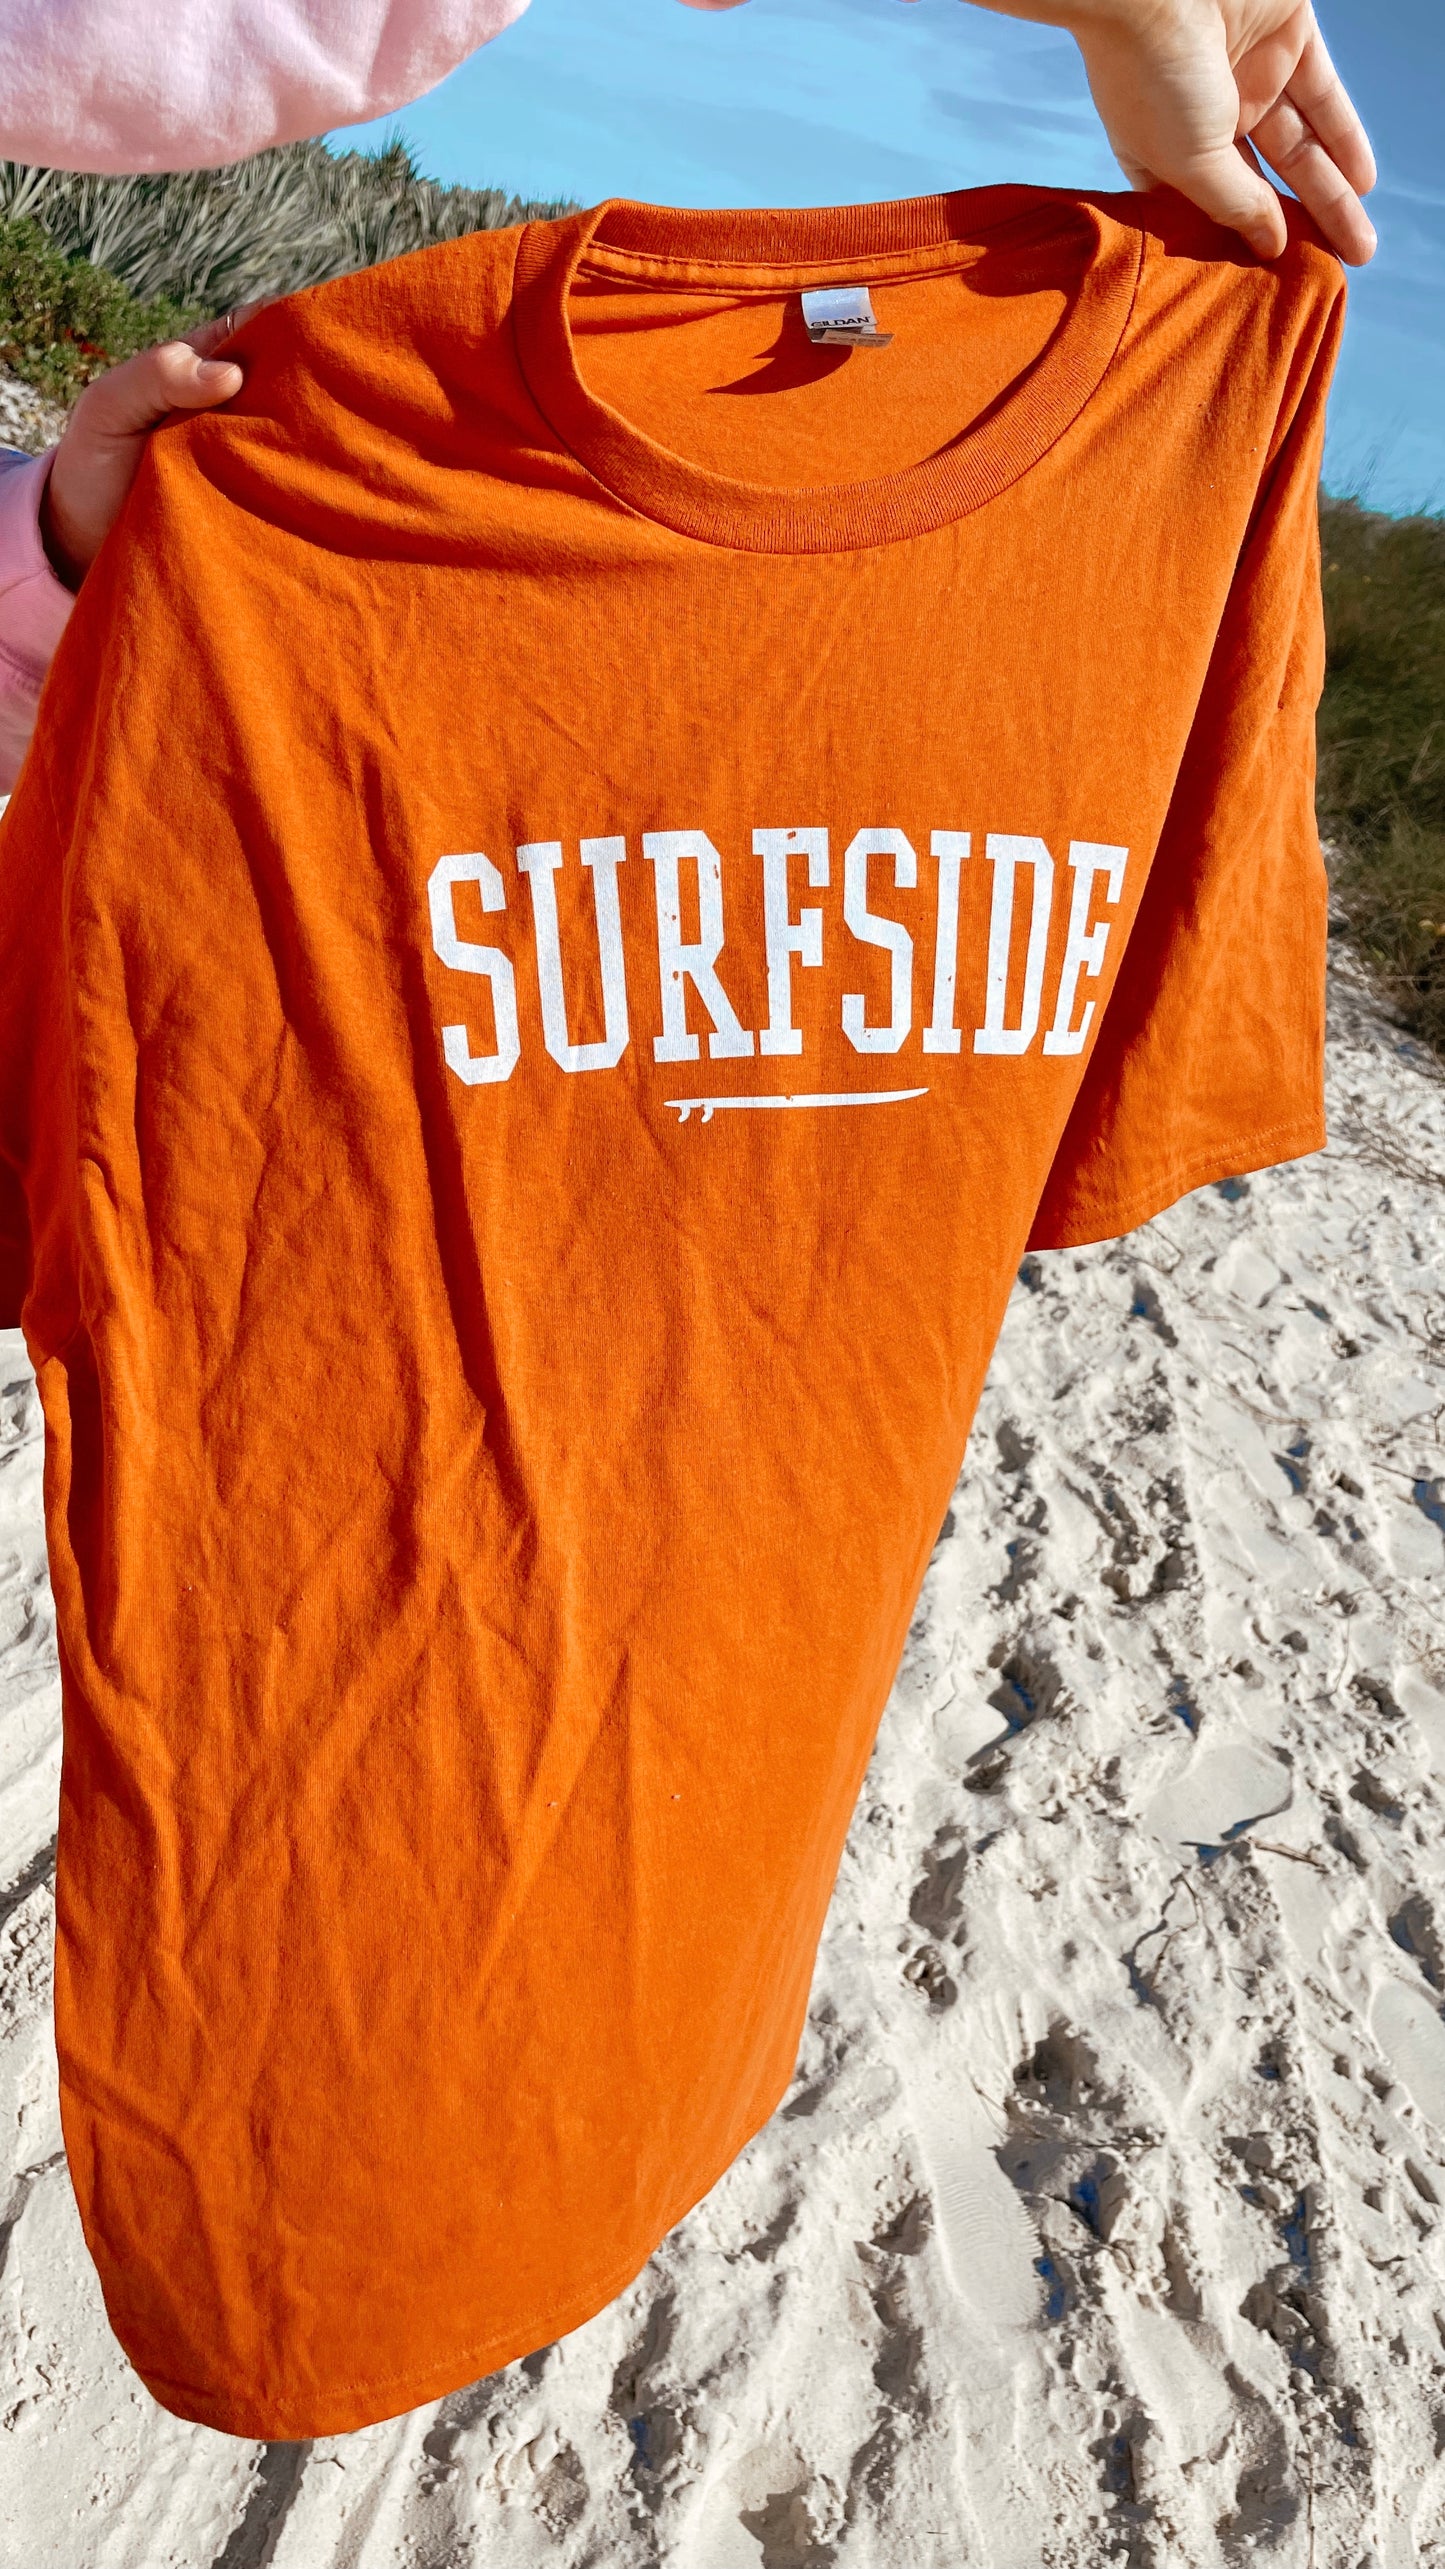 Surf Side Cotton Tee